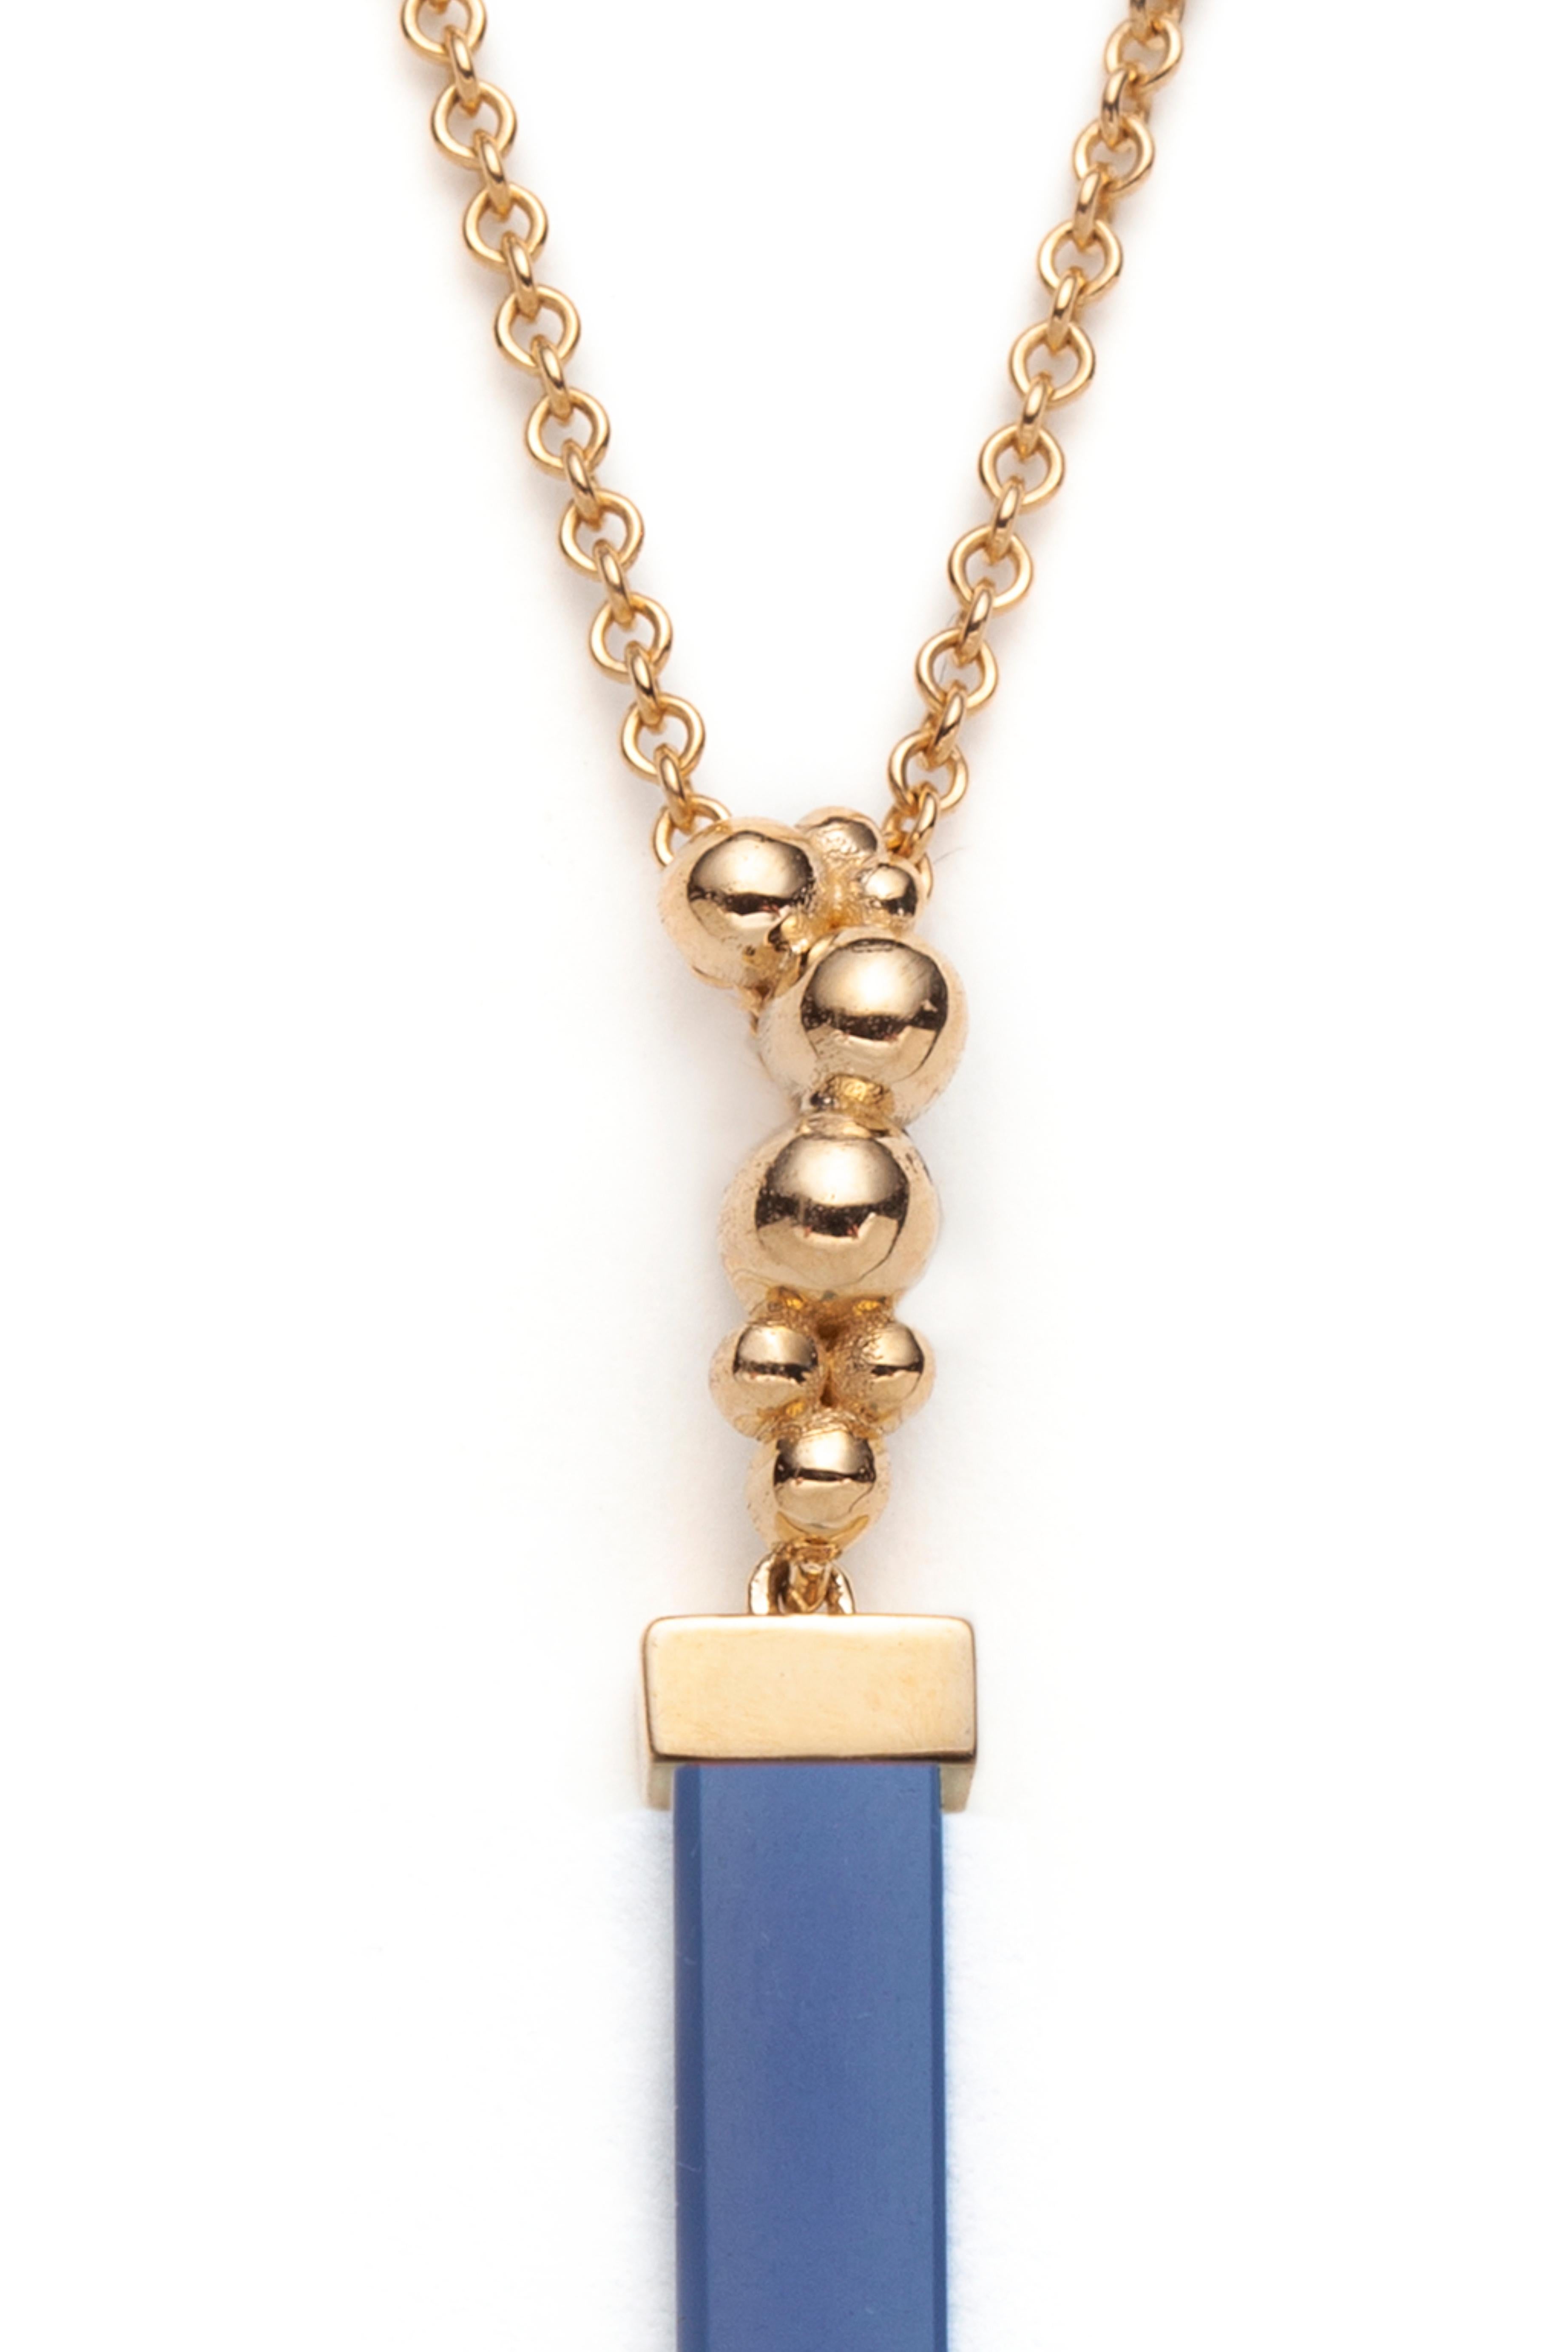 We make this colorful pendant in 14k yellow gold set with a rectangular Coral batons and a citrine teardrop. The pendant length is 42mm. The 18